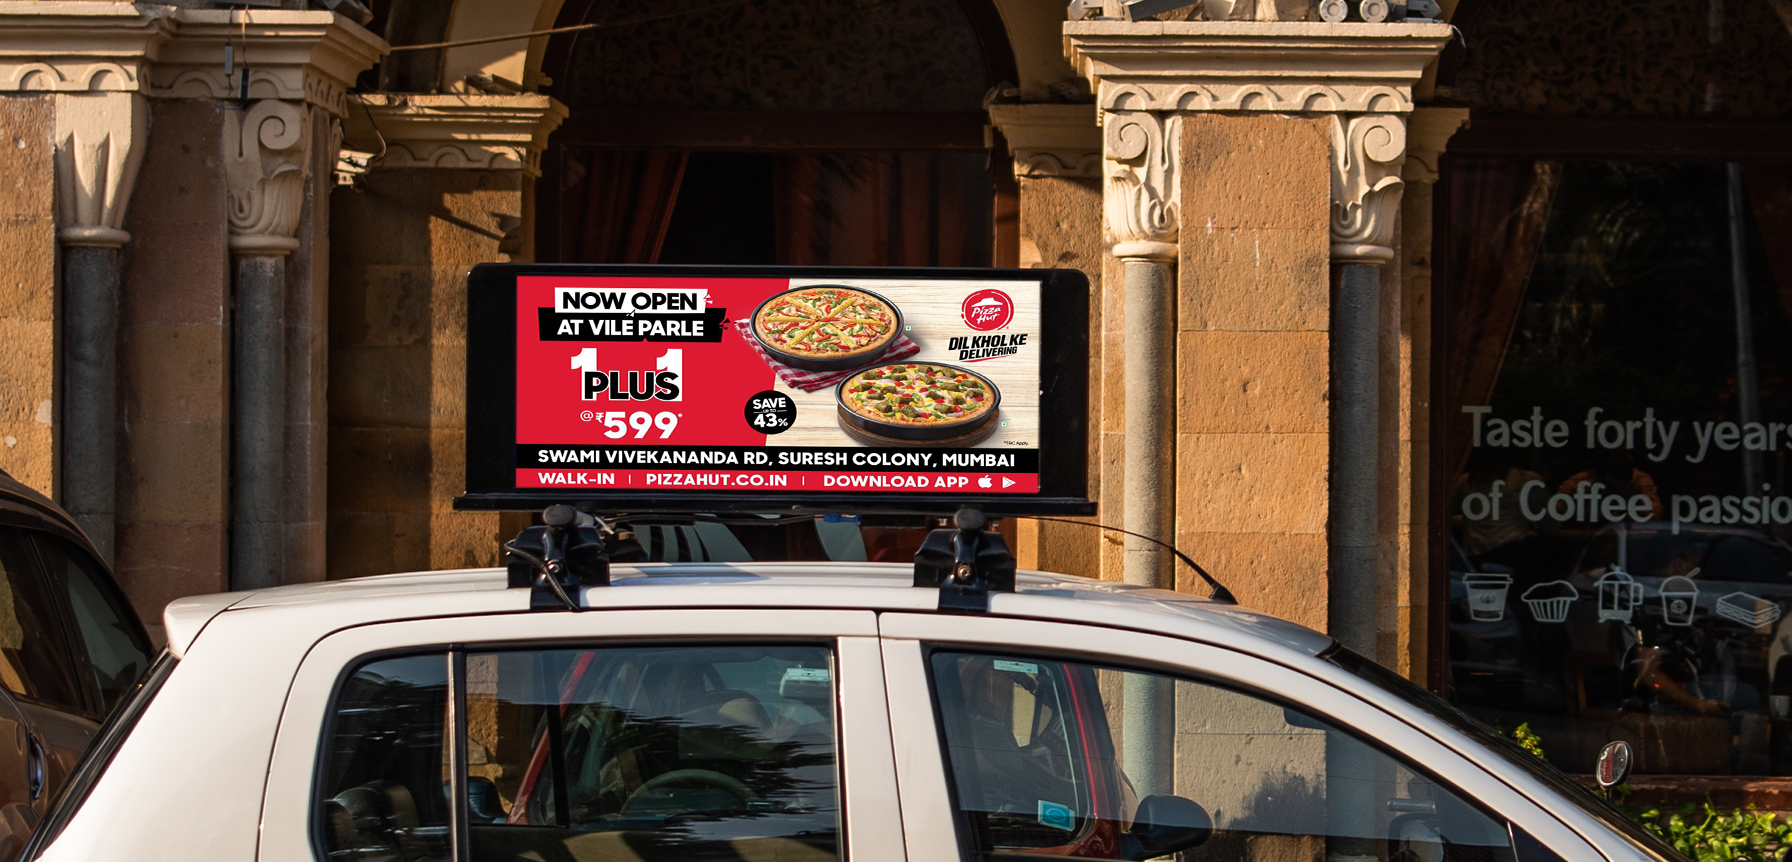 Pizza Hut Taxi Top Creative For Vile Parle featuring buy1 get 1 offer